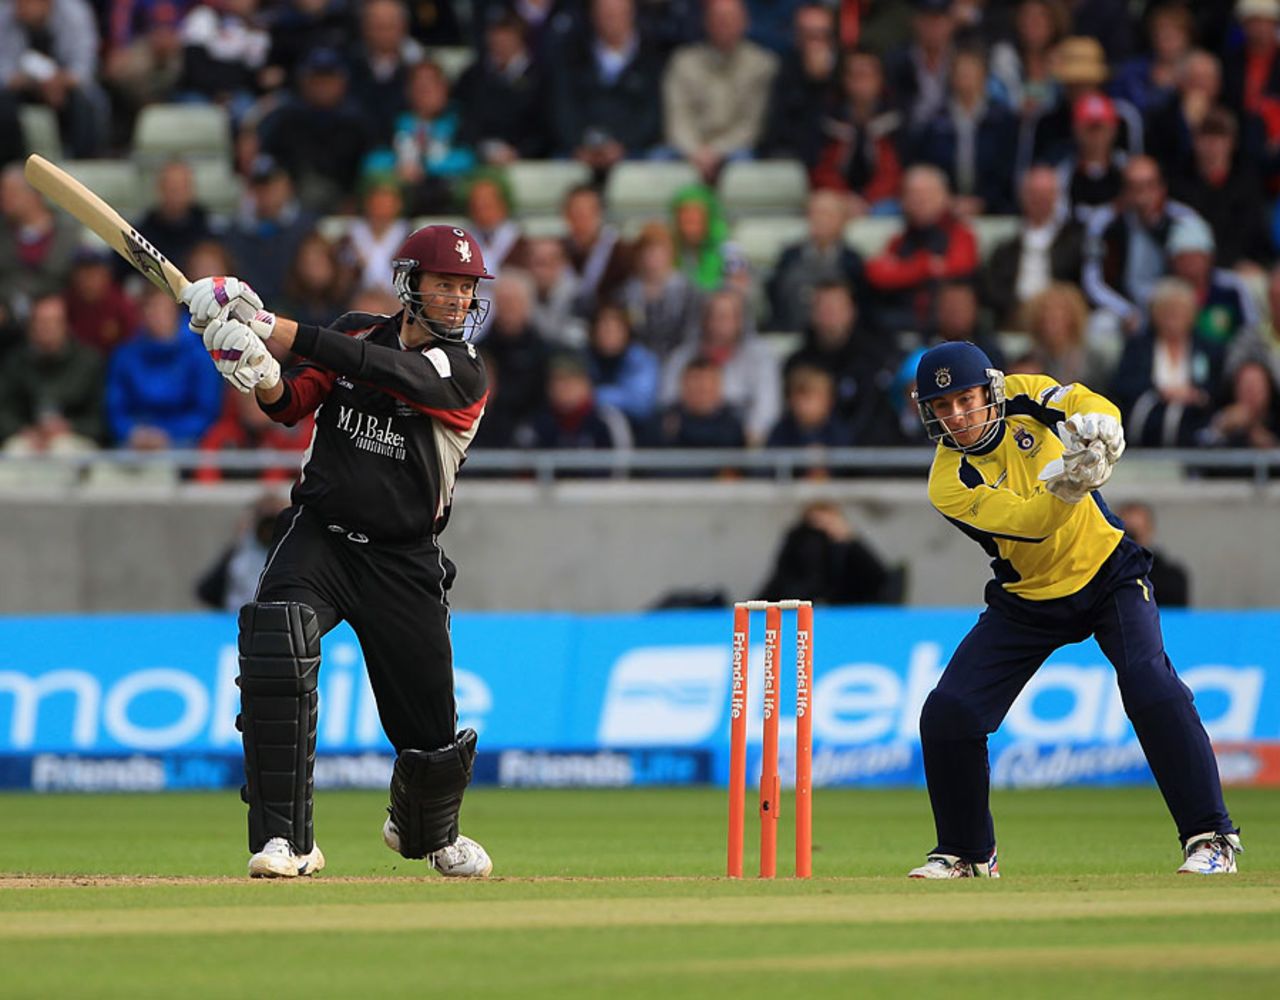 Marcus Trescothick launched Somerset's chase in fine style, Hampshire v Somerset, Friends Life t20, 2nd Semi Final, Edgbaston, August 27 2011